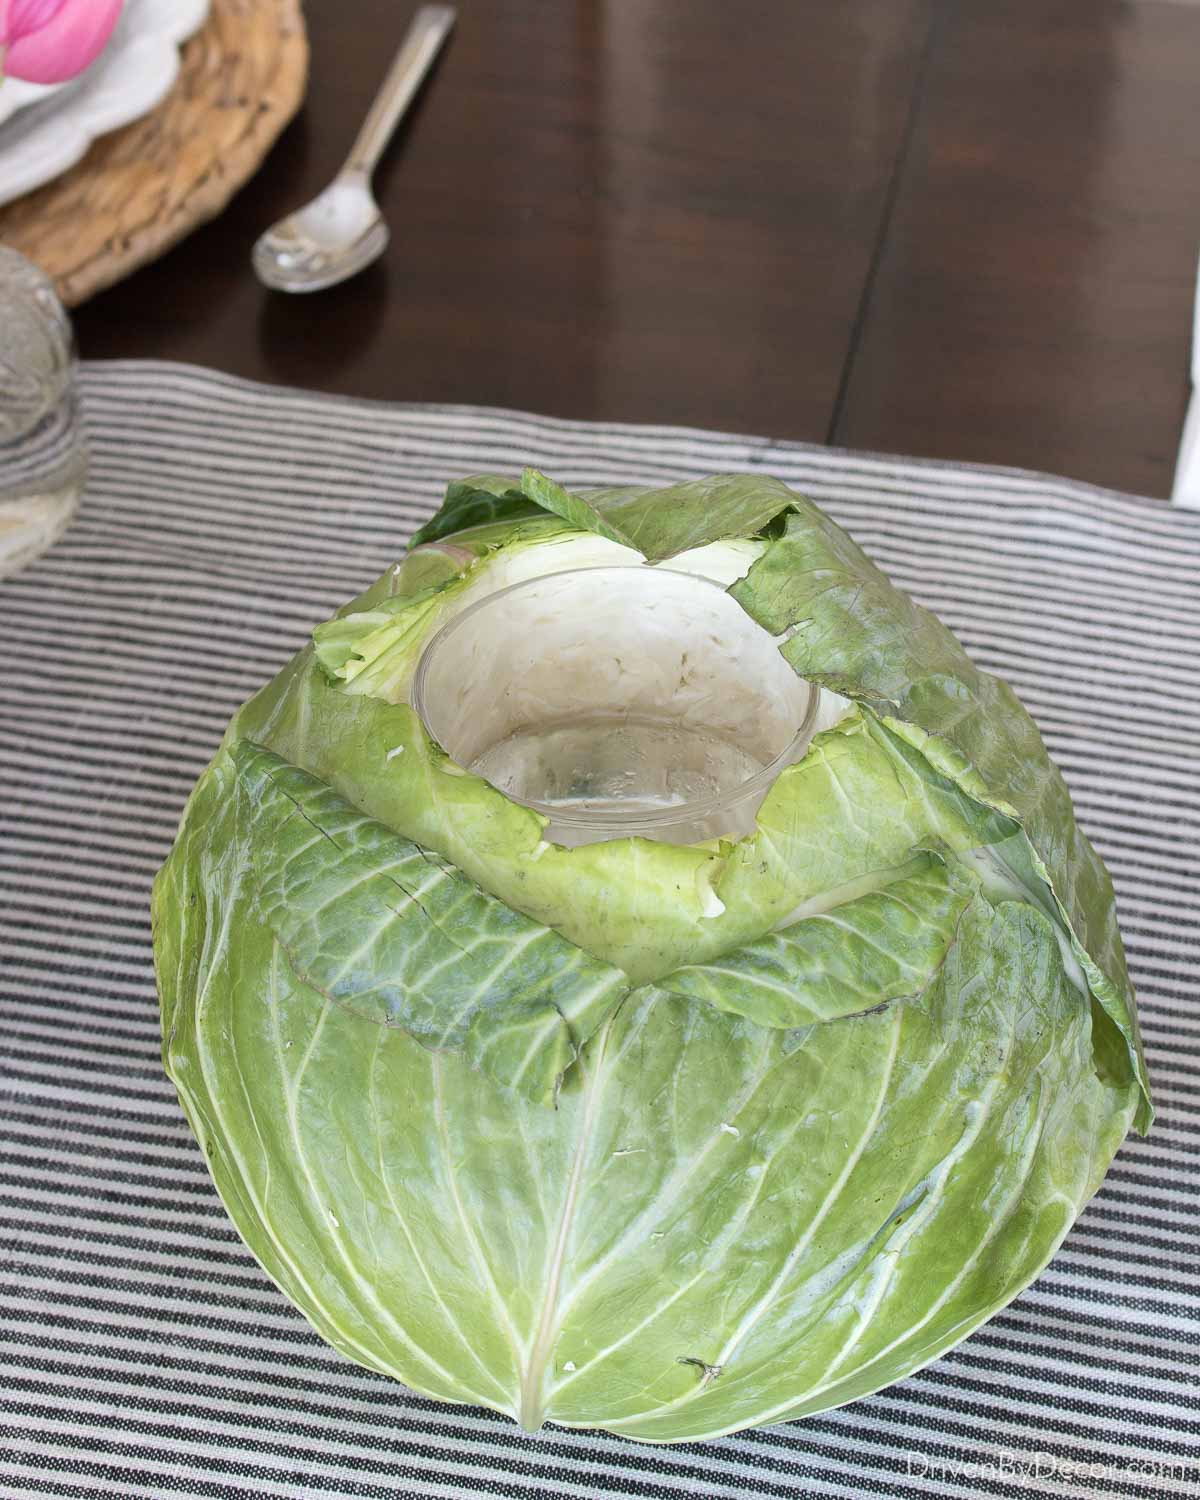 Hollowed out cabbage for making it into a vase